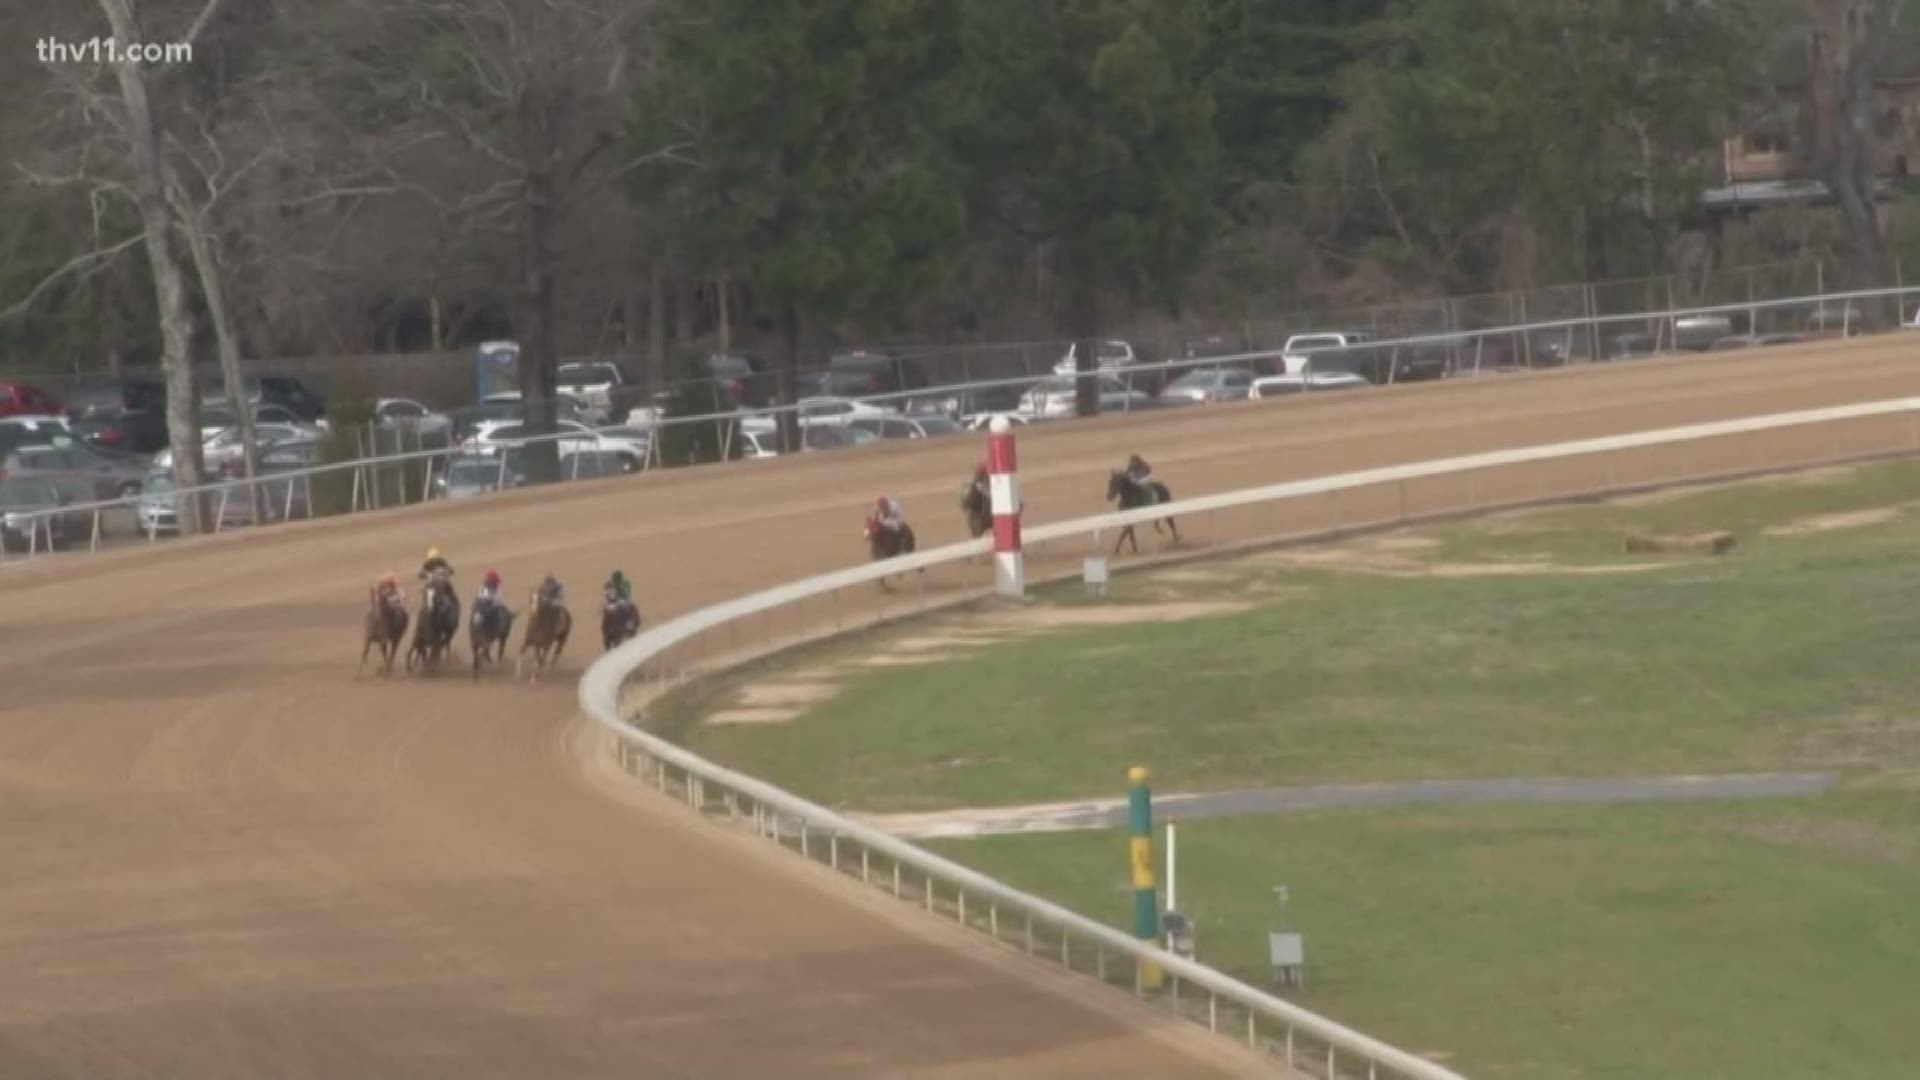 For several years the idea behind the big purses at Oaklawn has been to get the big money horses and their owners to come to Arkansas. Now the trends appear to be getting those big money horses and their owners to live here.